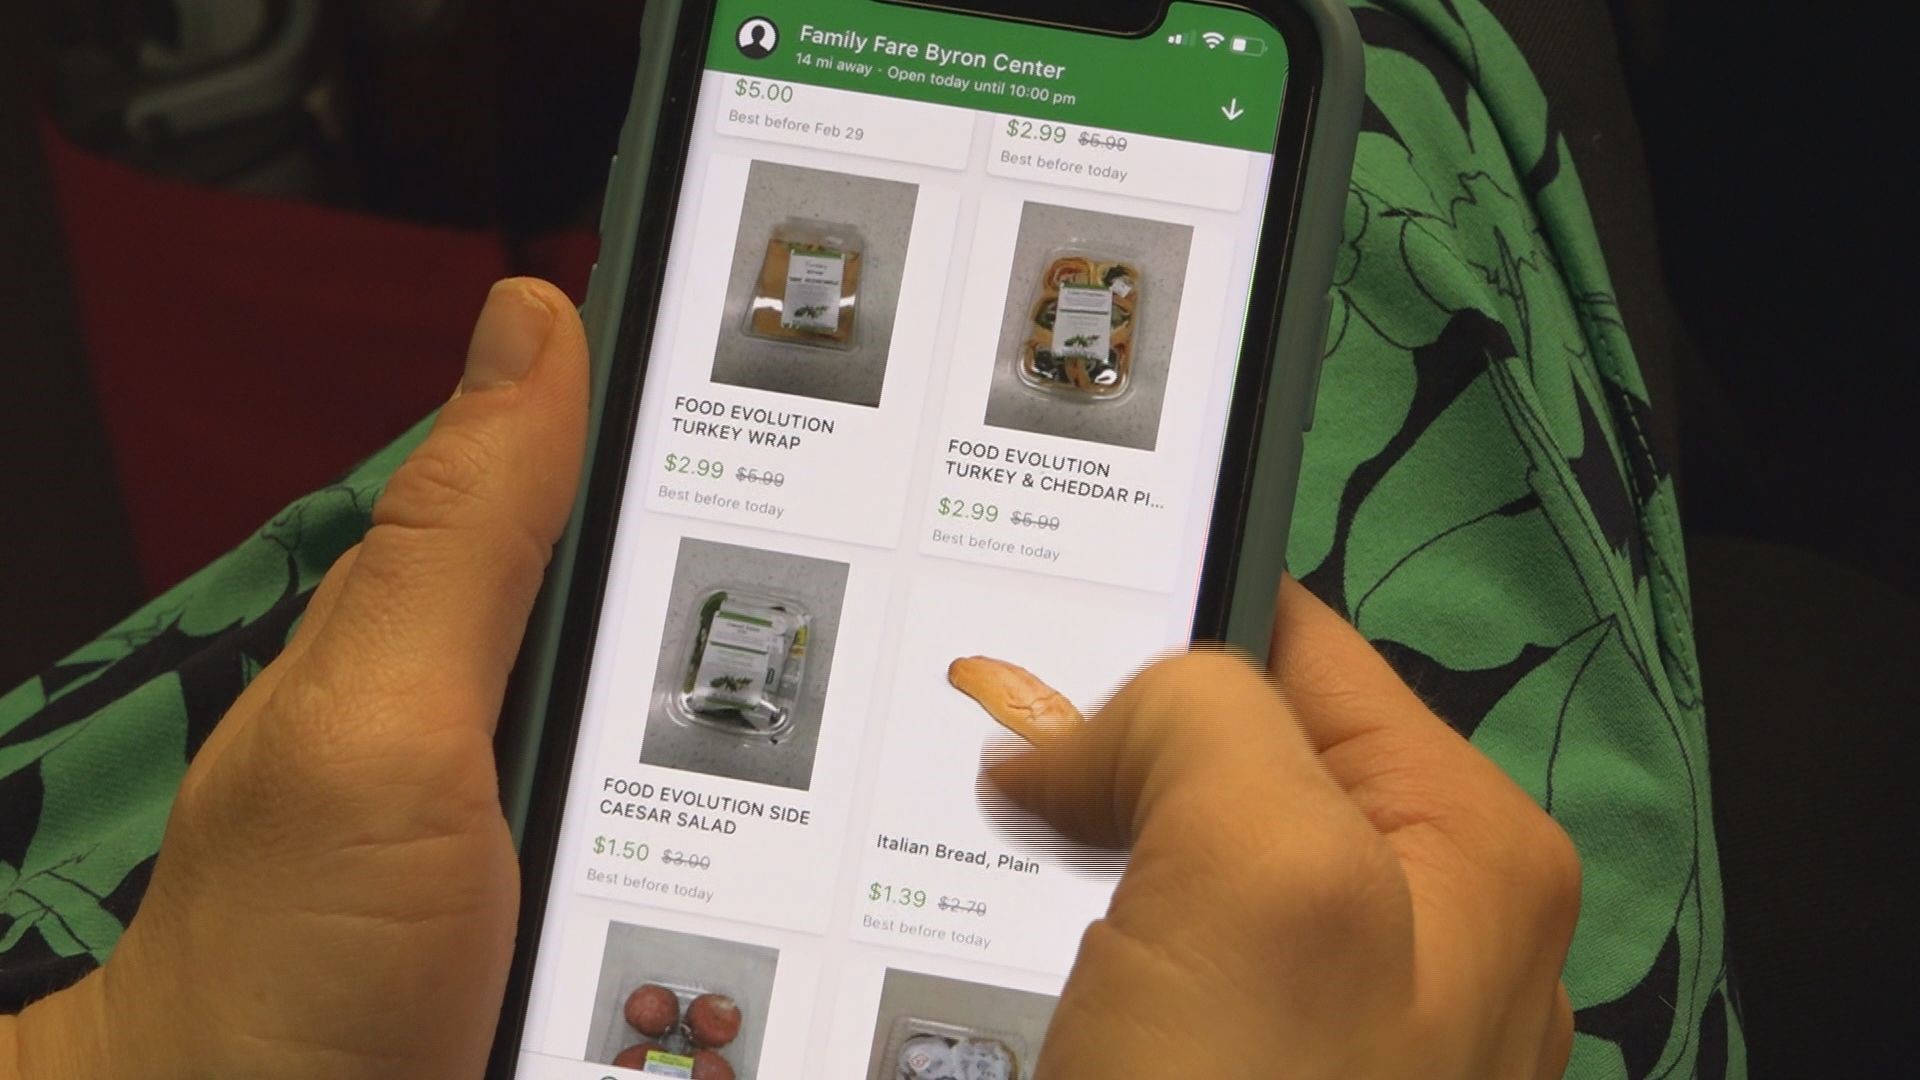 Flashfood is an app allowing shoppers to save money on groceries. Meijer is the first retailer to support SNAP benefits with the app nationwide.